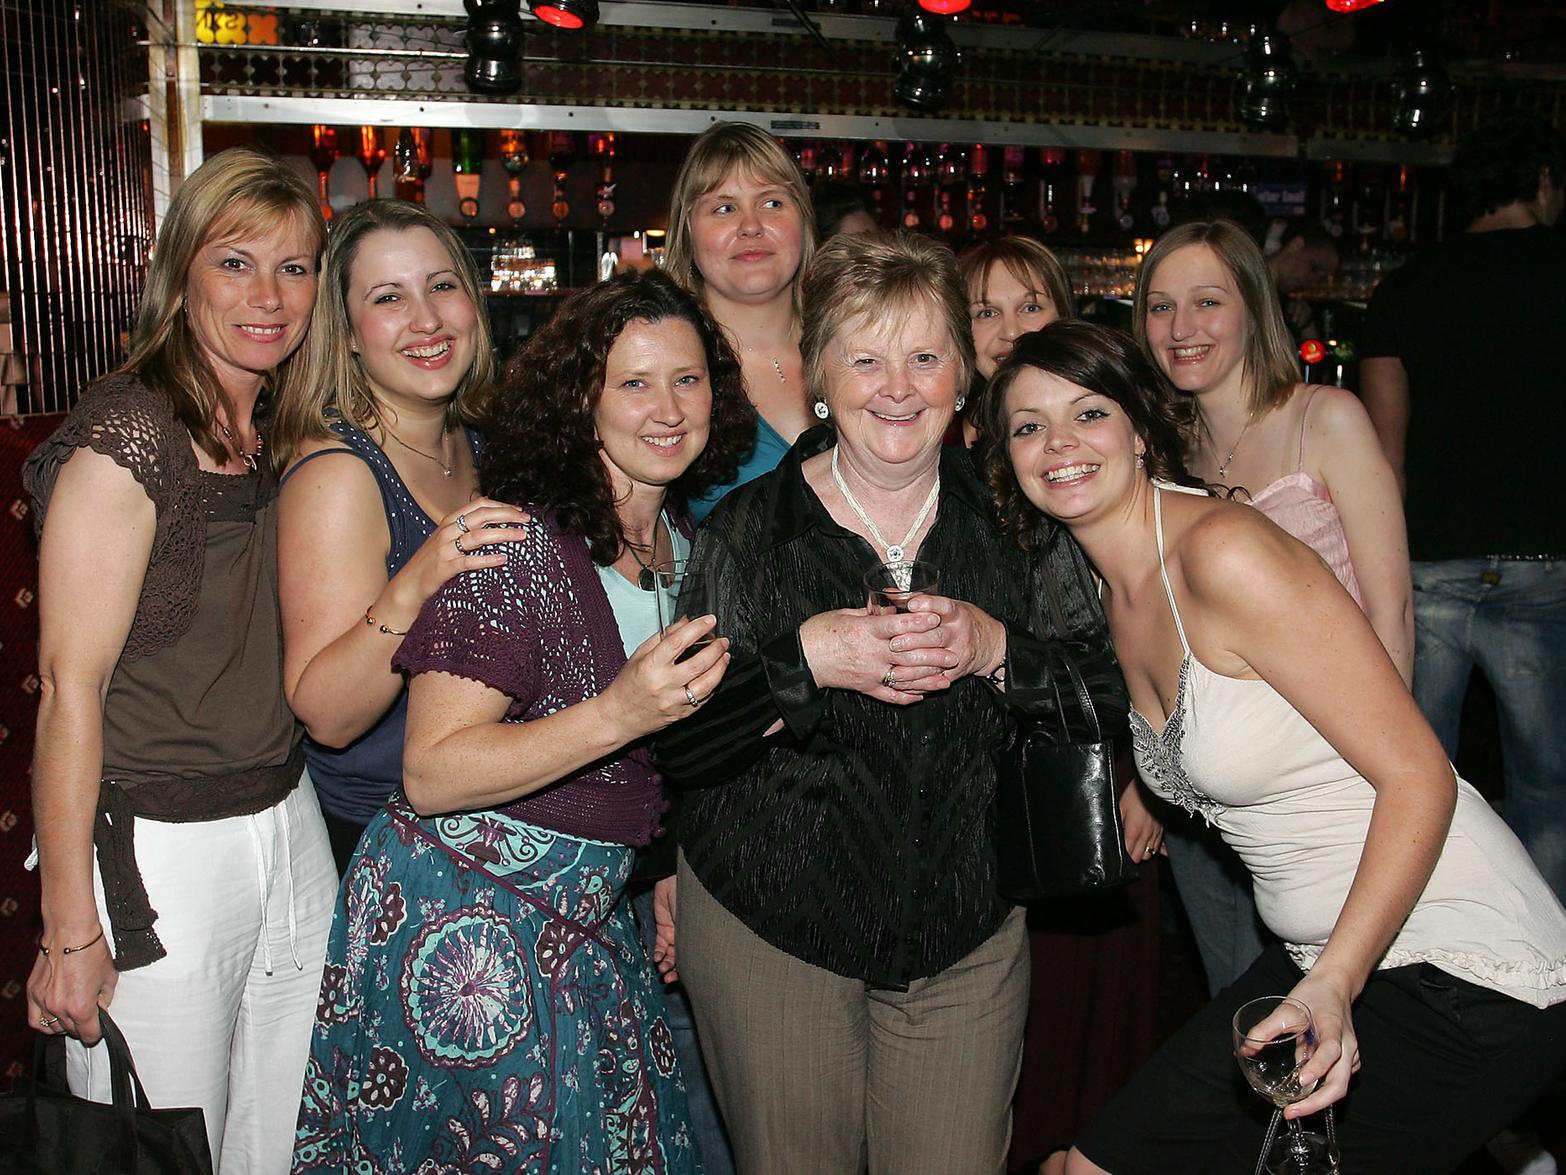 Christine Donovan (centre) celebrates her retirement from Dale House School with friends and colleagues at The Frontier.